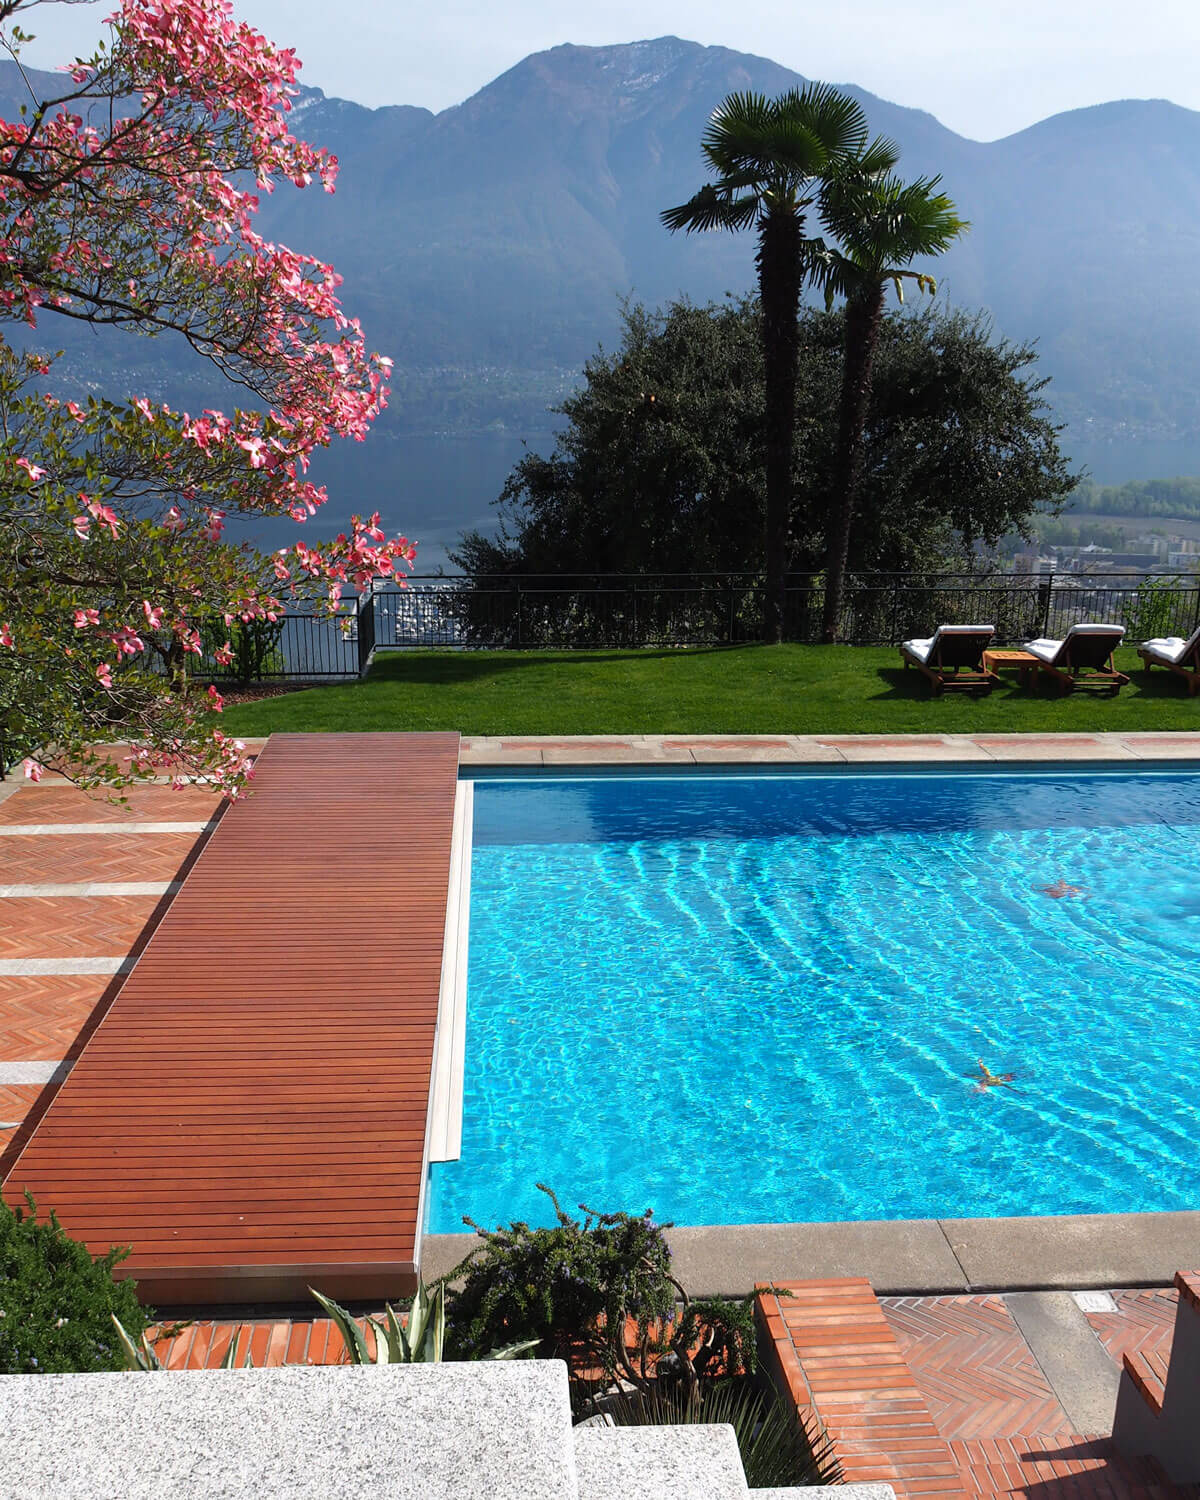 The pool at Hotel Villa Orselina in Switzerland